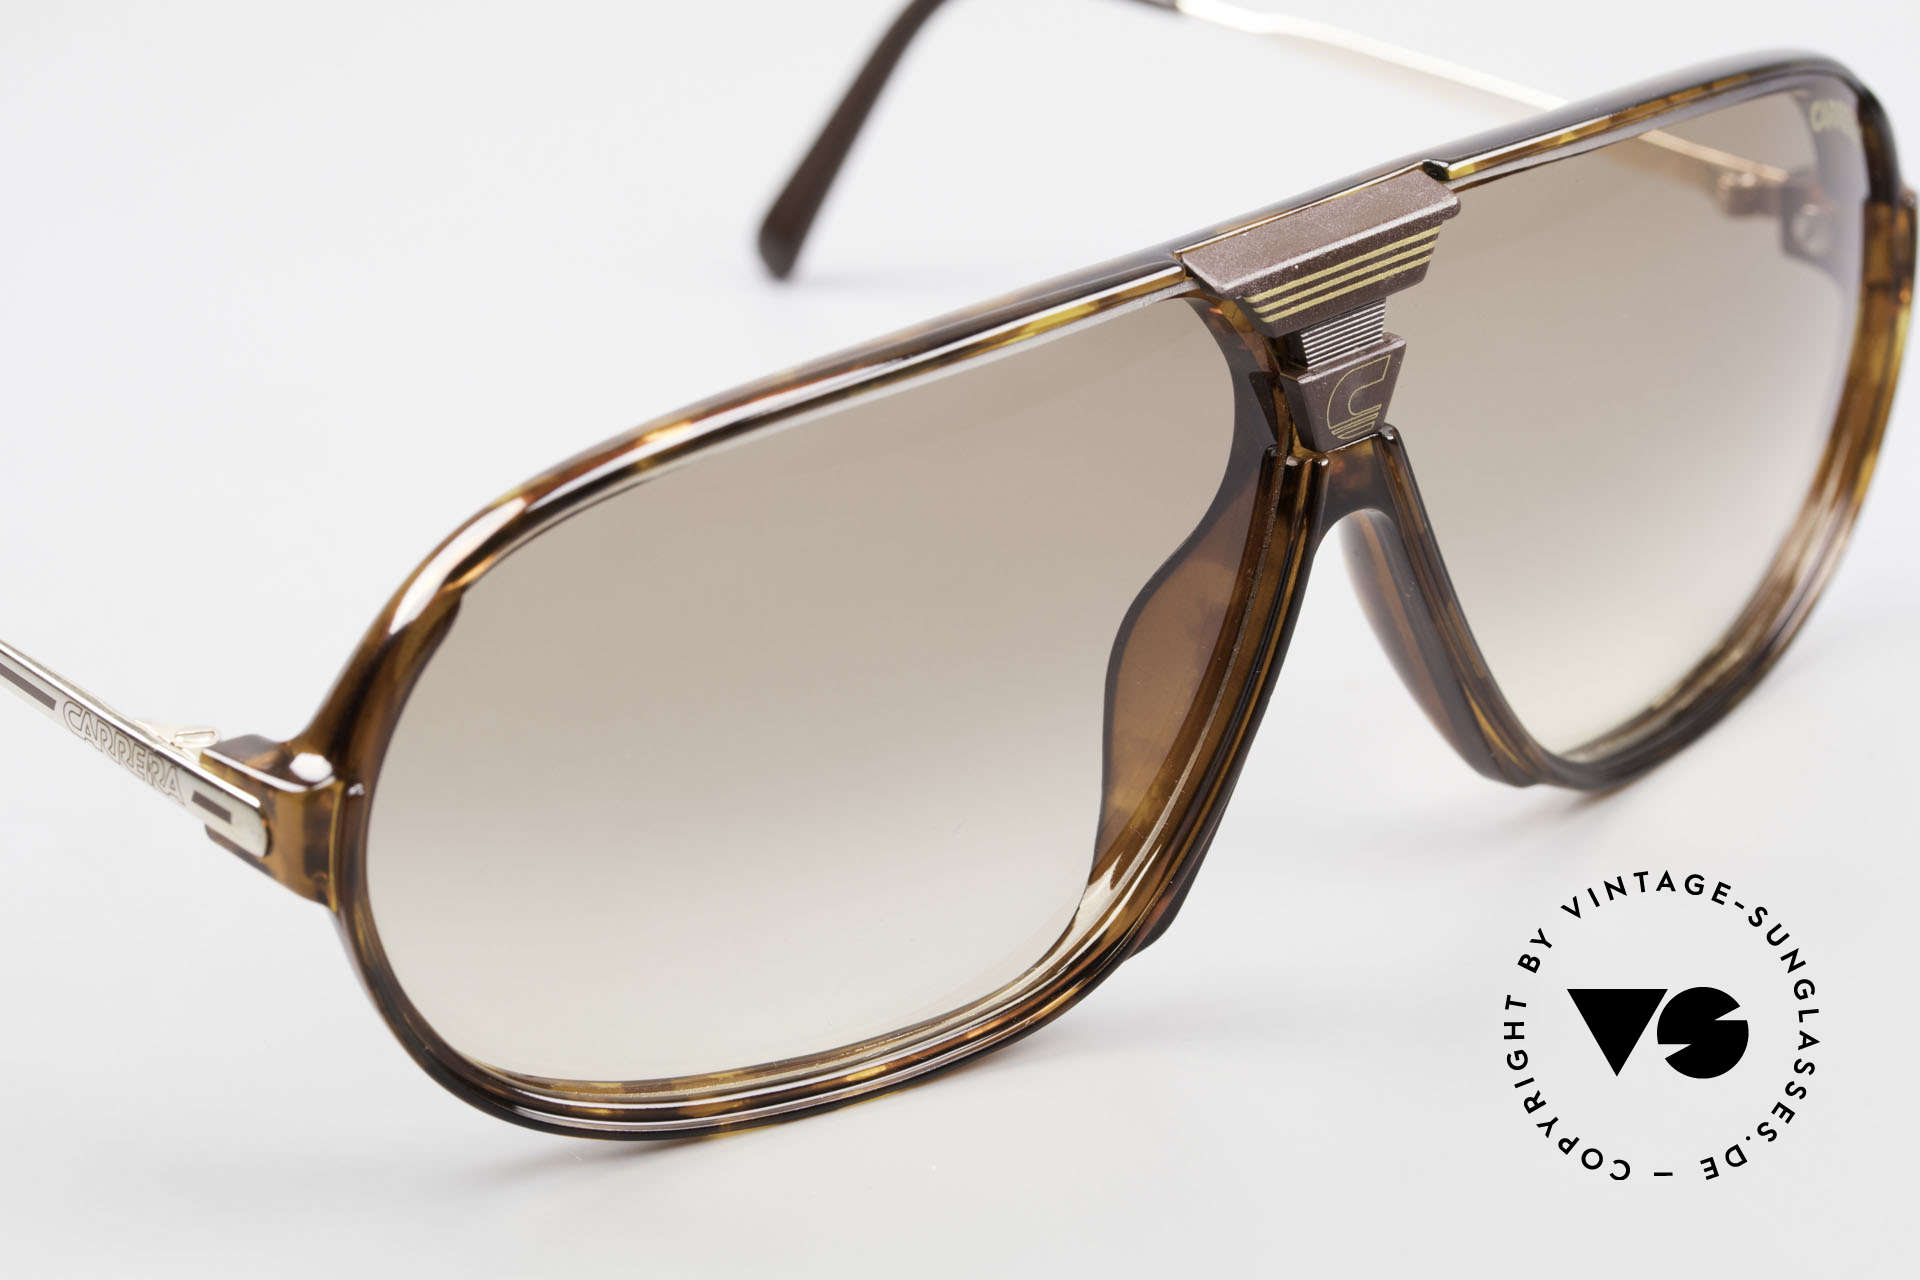 Carrera 5416 80's Shades Additional Lenses, a symbiosis of sport and fashionable lifestyle!, Made for Men